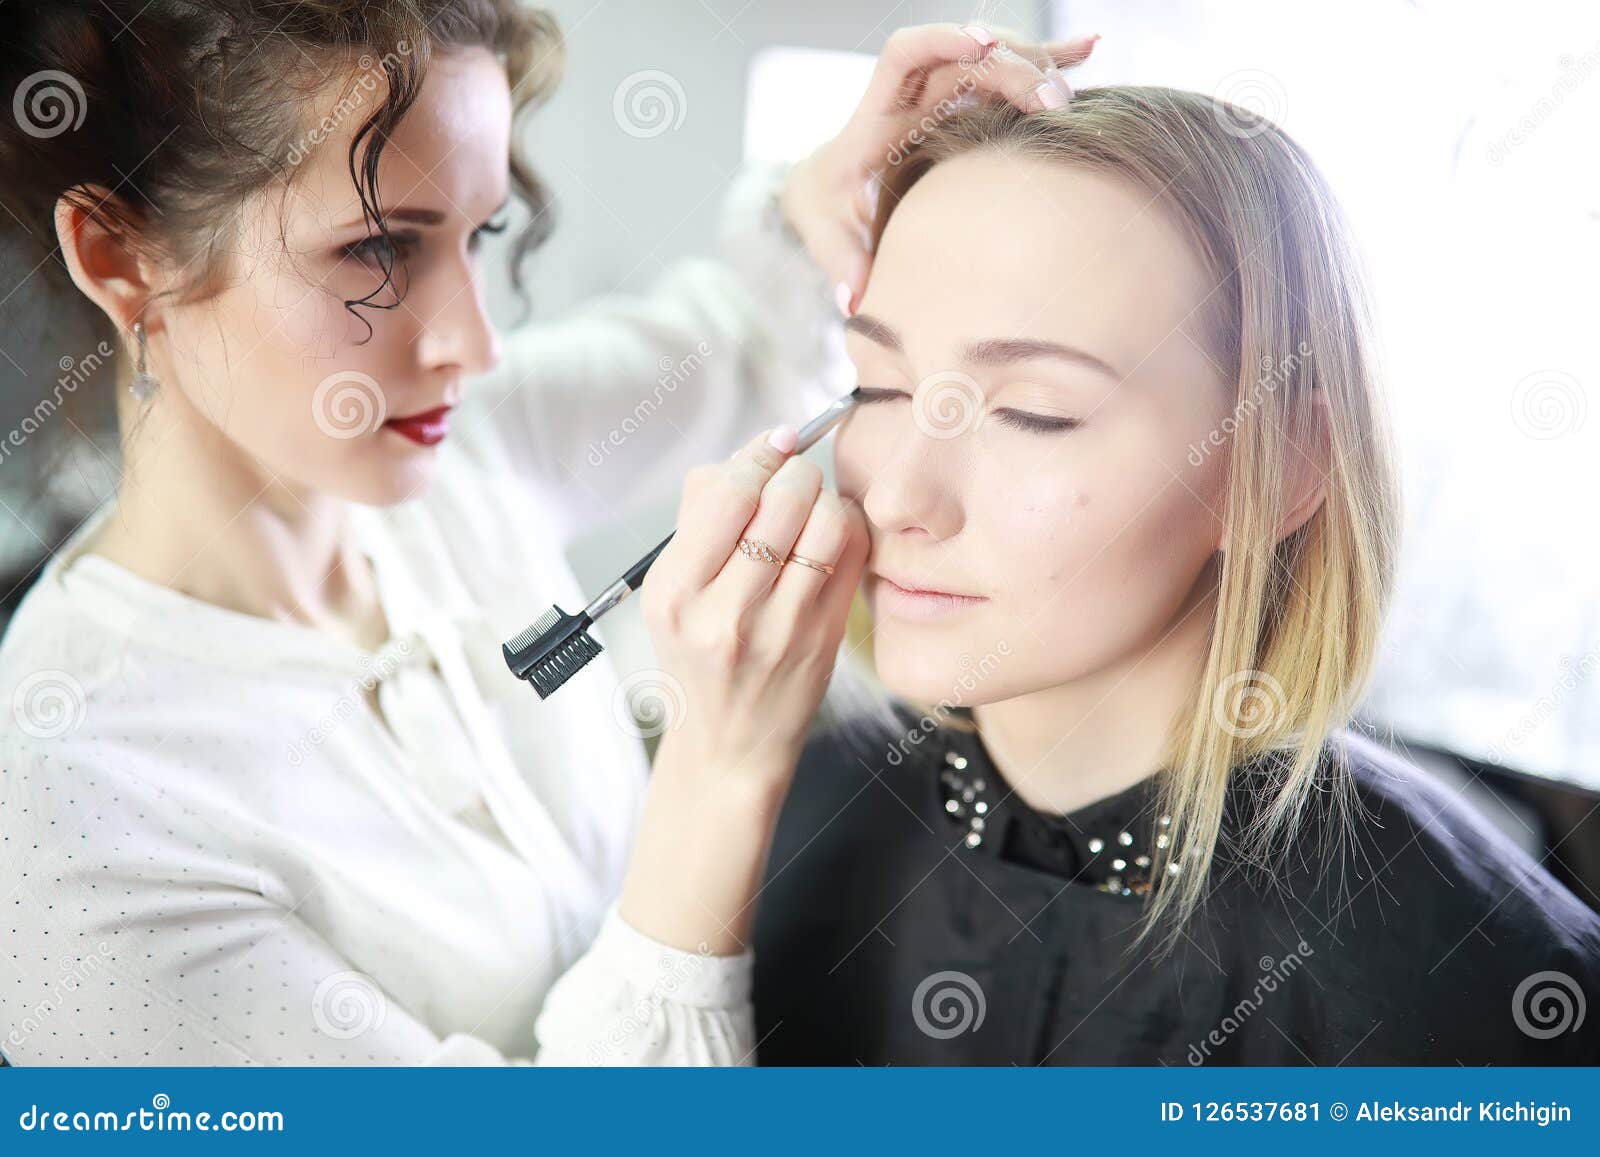 Young Girl with a Make-up Artist Stock Image - Image of fashion ...